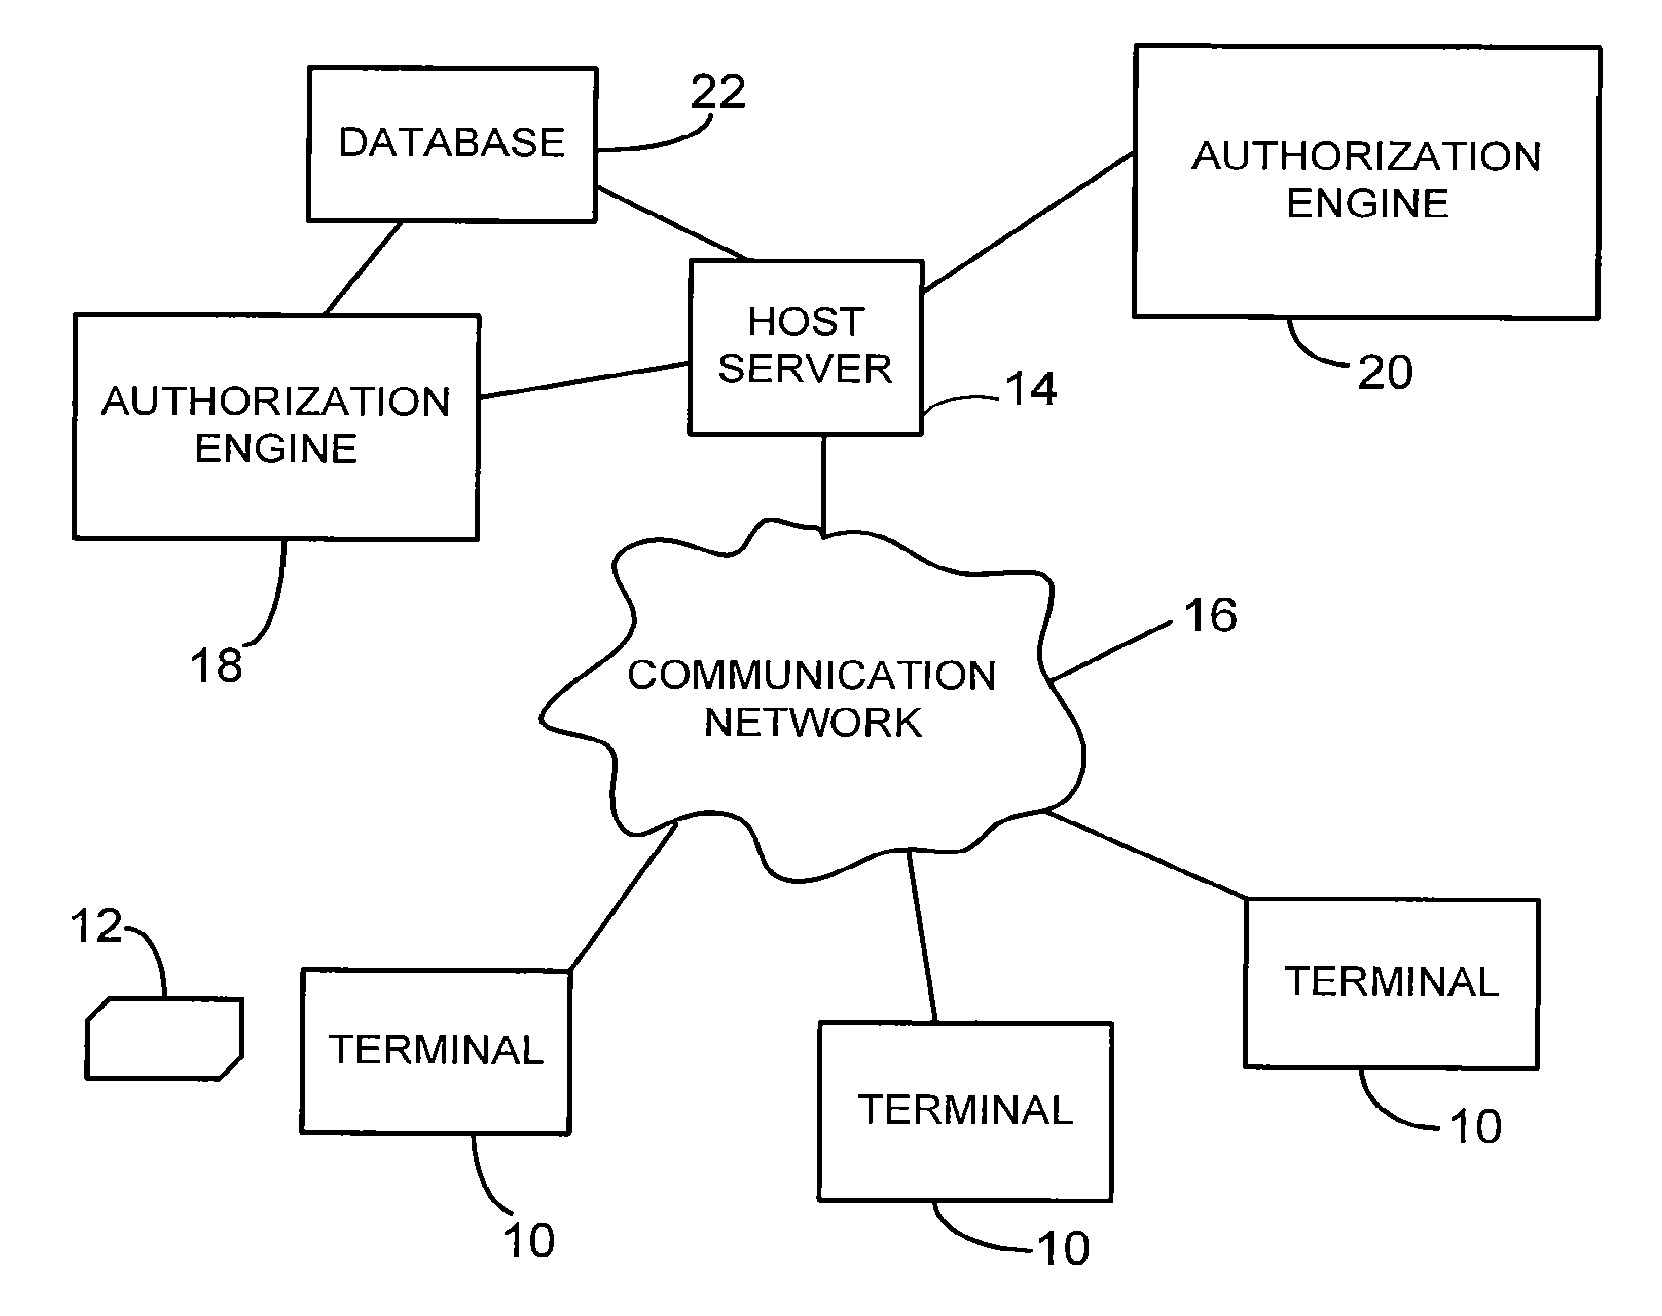 System and method for authorizing electronic payment transactions